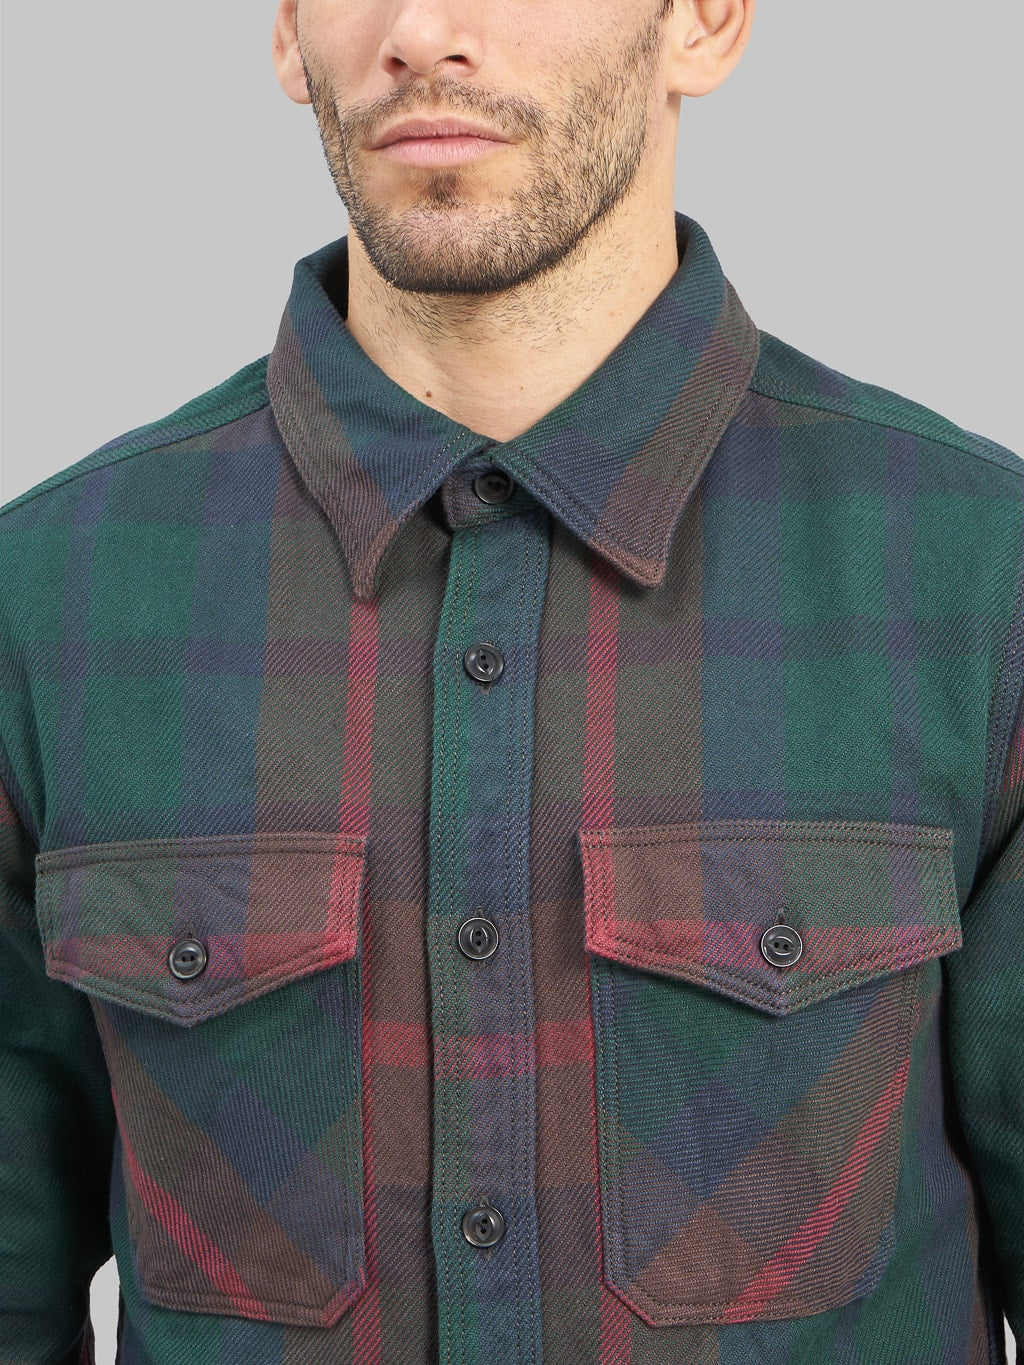 UES Extra Heavy Flannel Shirt green chest pockets